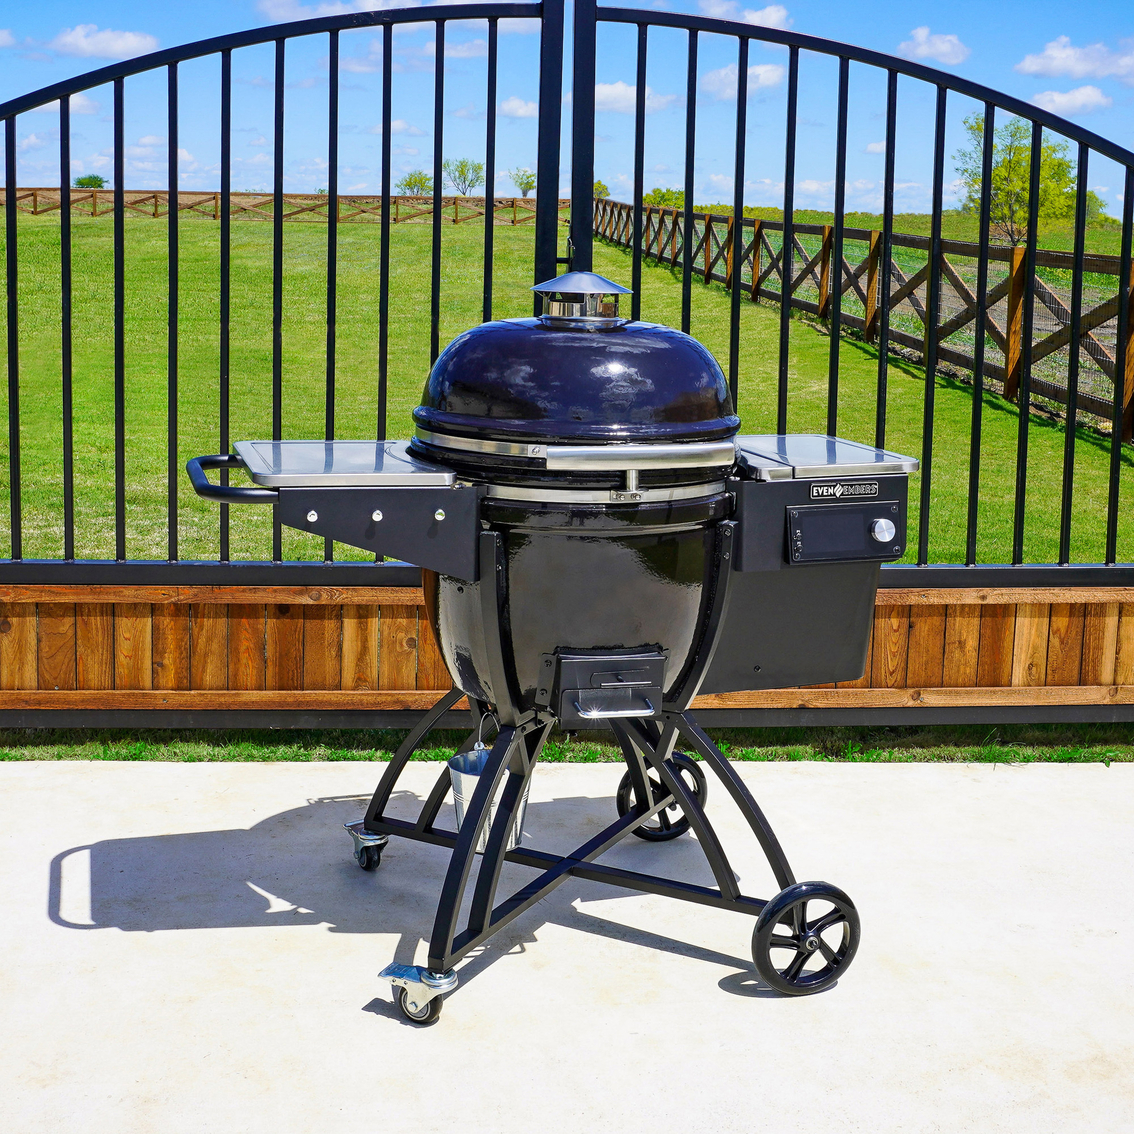 Iron Embers Grill - Open Fire Cooking Refined by Iron Embers Inc. —  Kickstarter